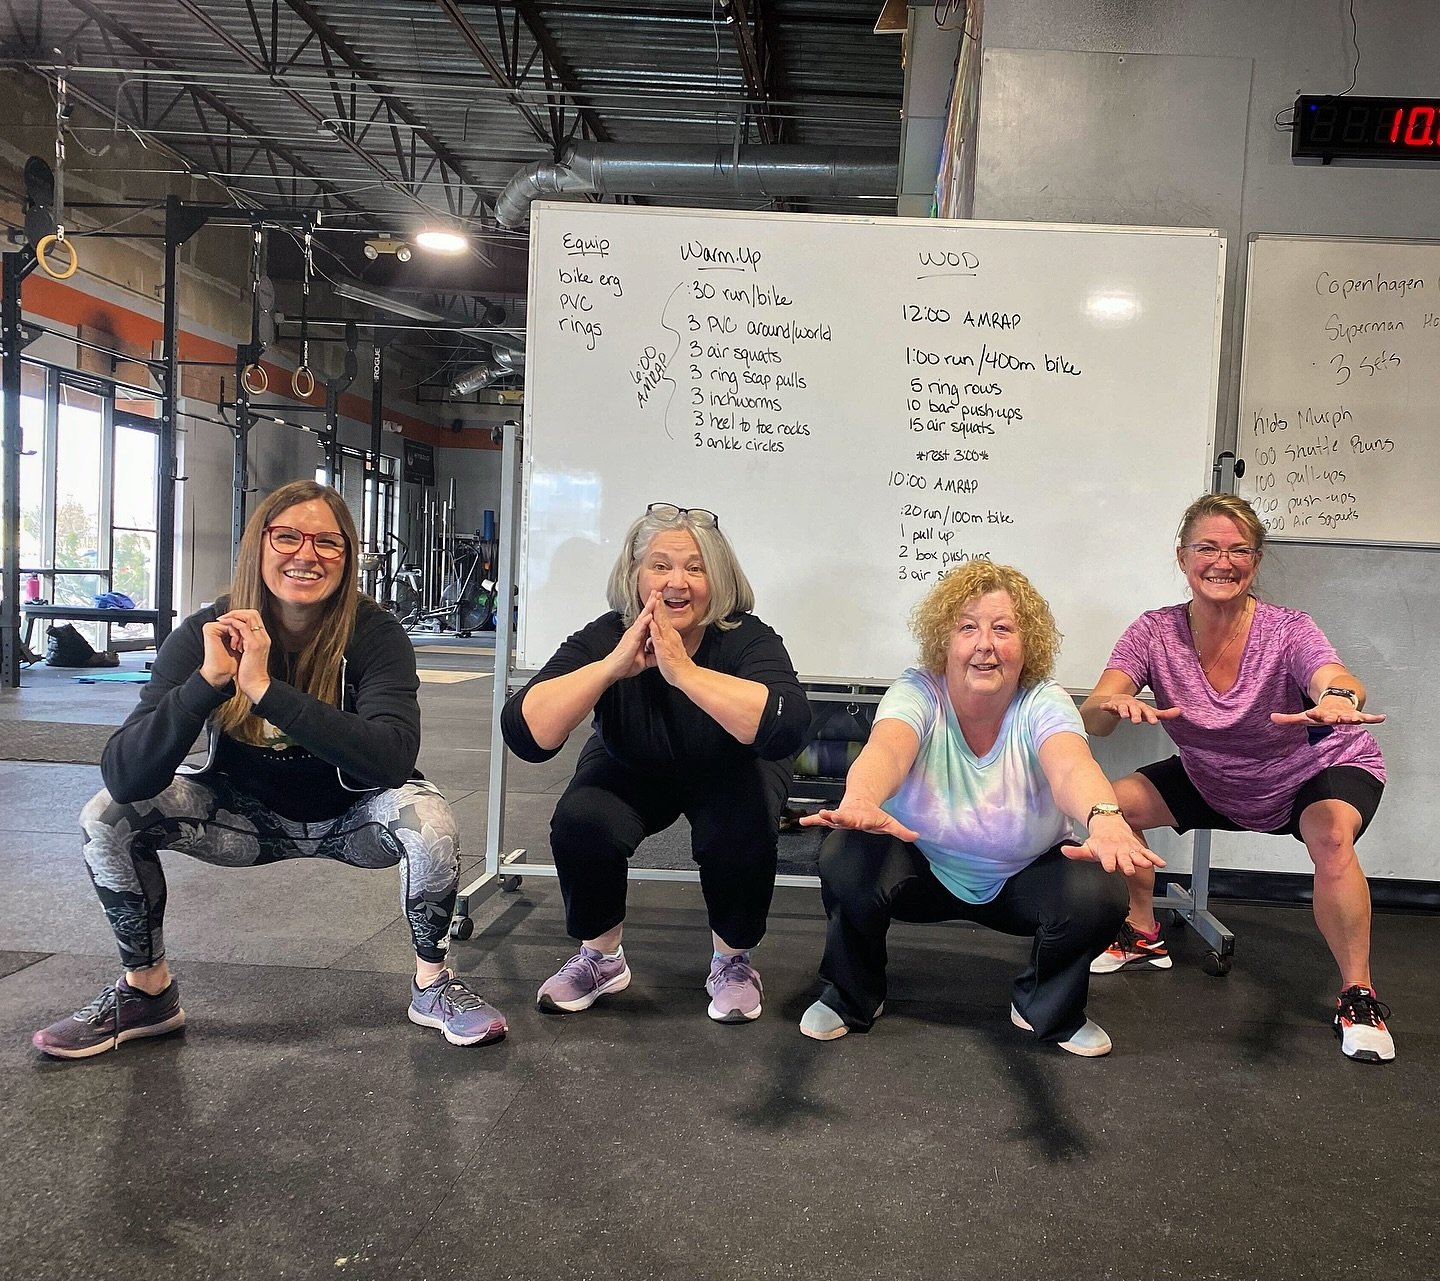 Our &ldquo;Legends&rdquo; getting squatty. 
55+ CrossFit: Monday, Wednesday, Friday 10:45am-11:45am. 

Join us working towards stronger functional movement! 💪🏼 Beginner friendly.